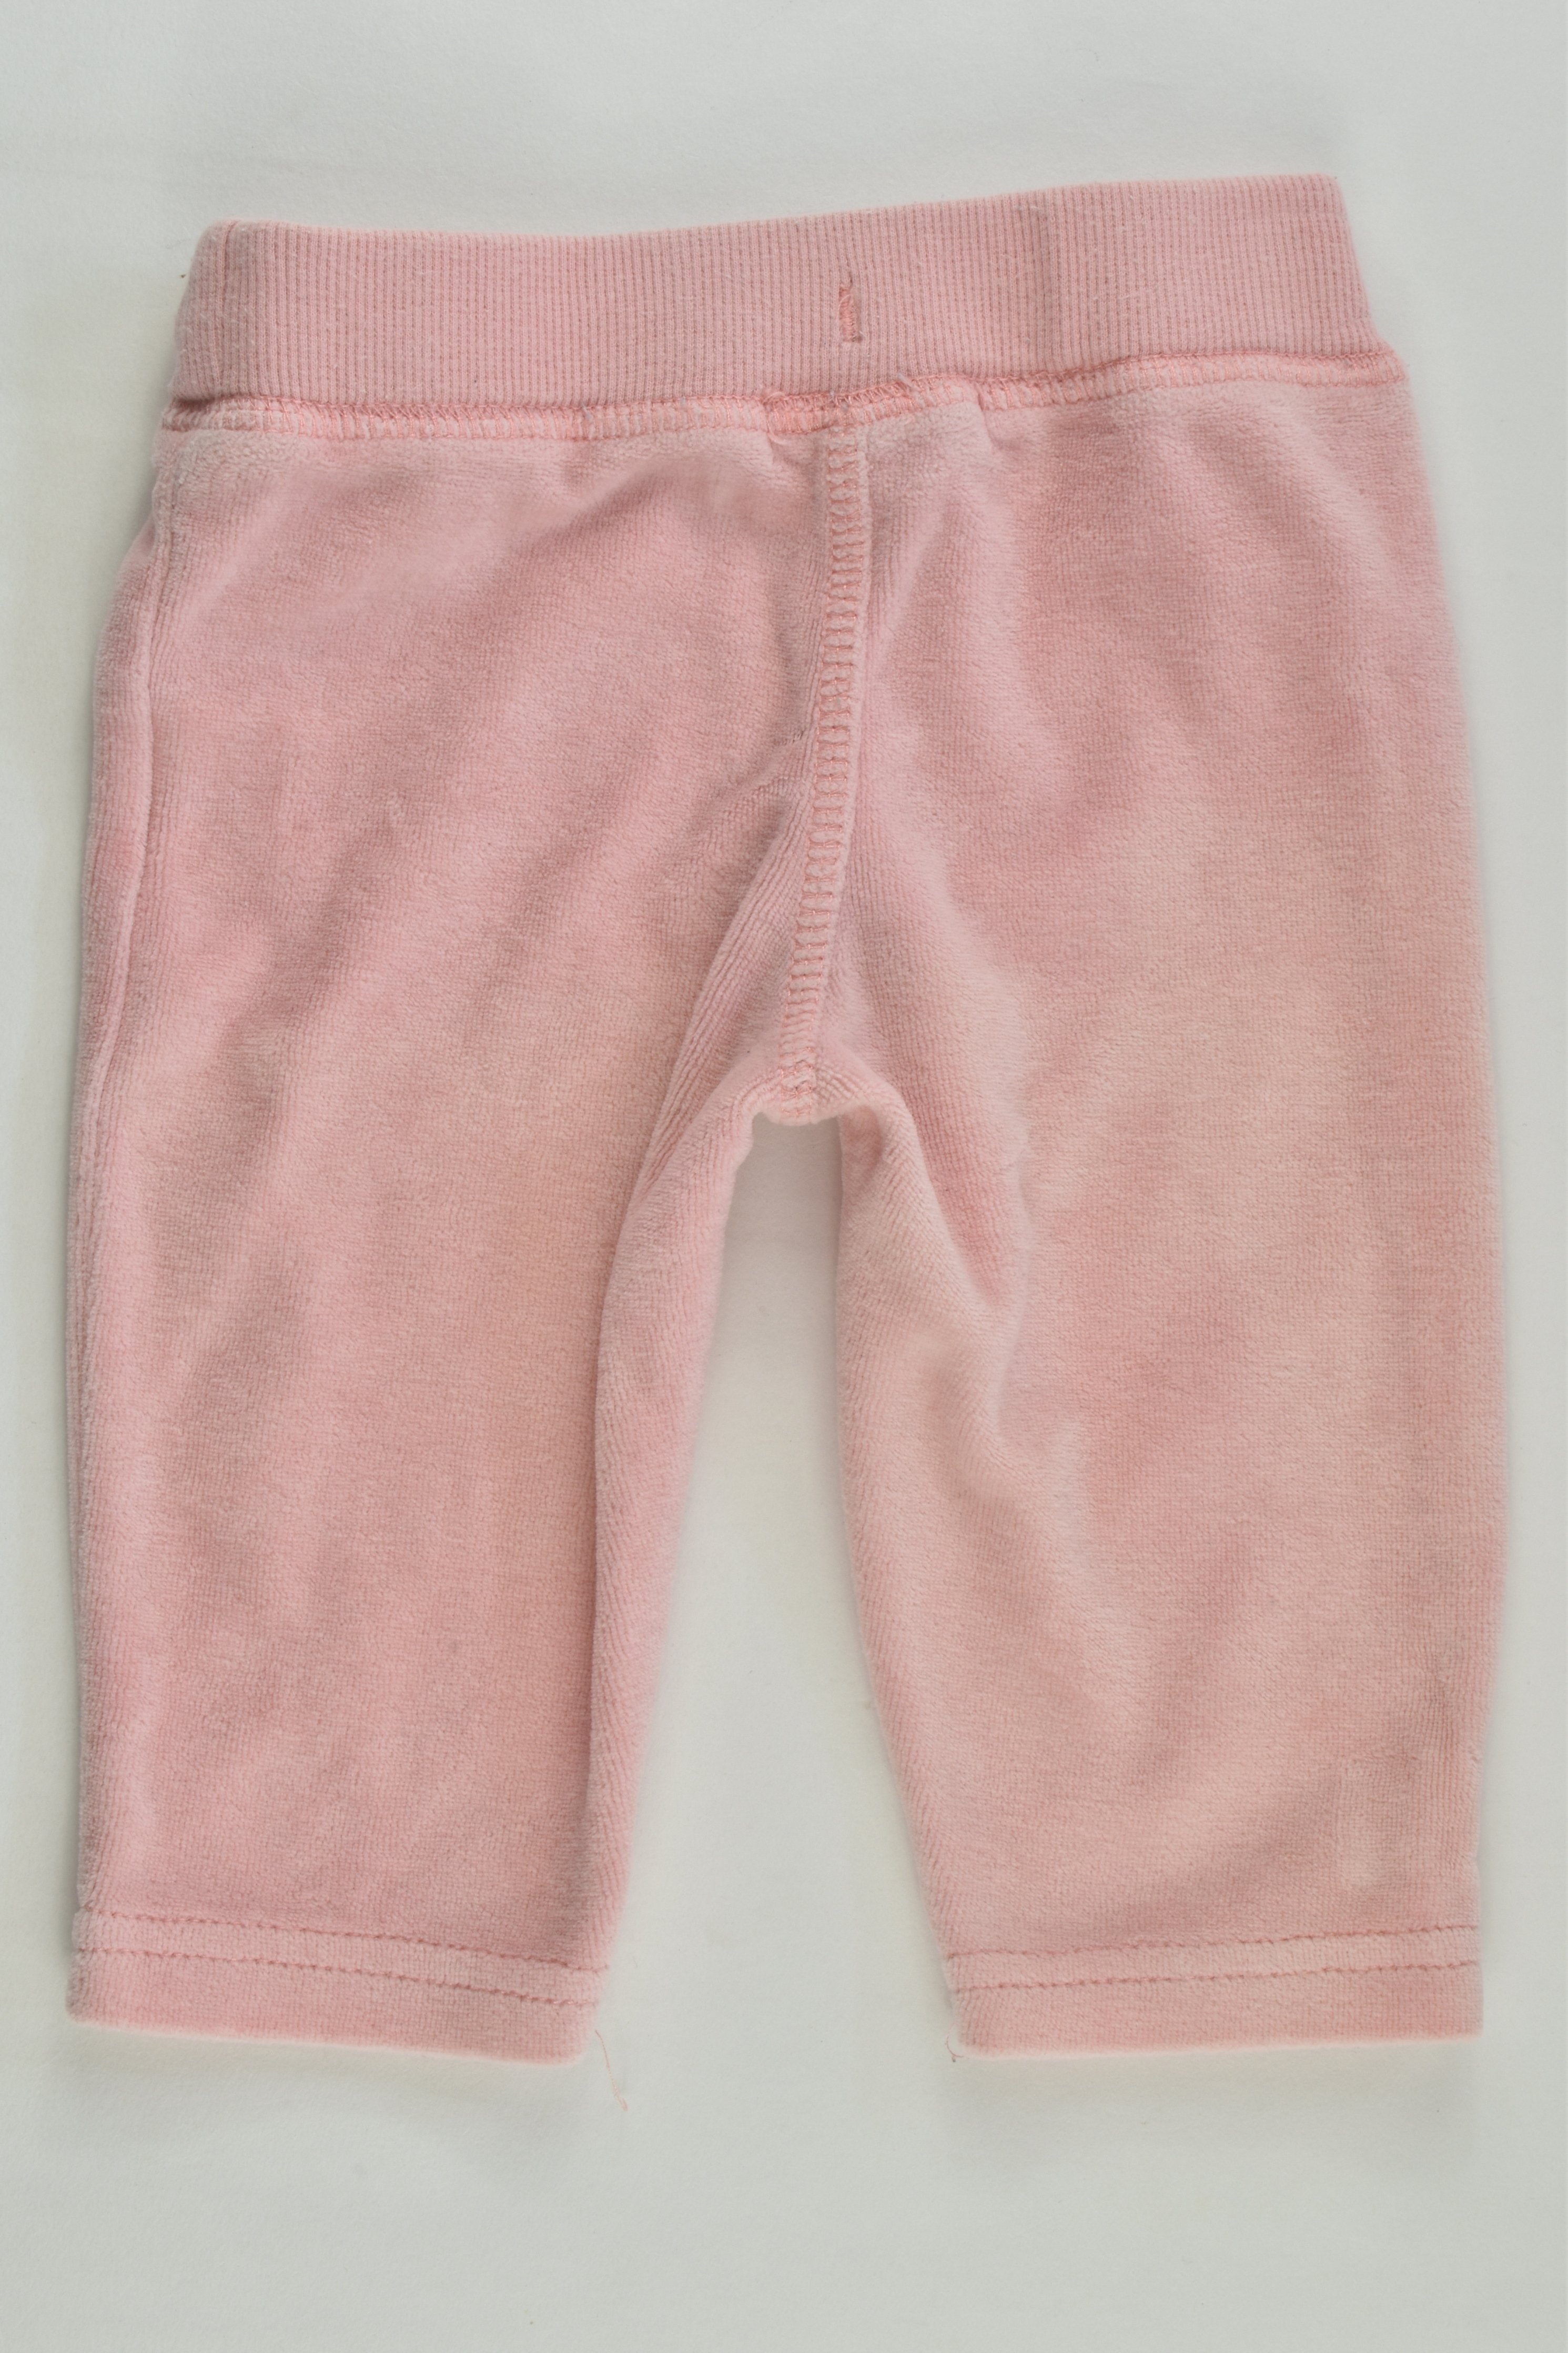 Old Navy Child Size 03 Months Gray Solid Pants  boys